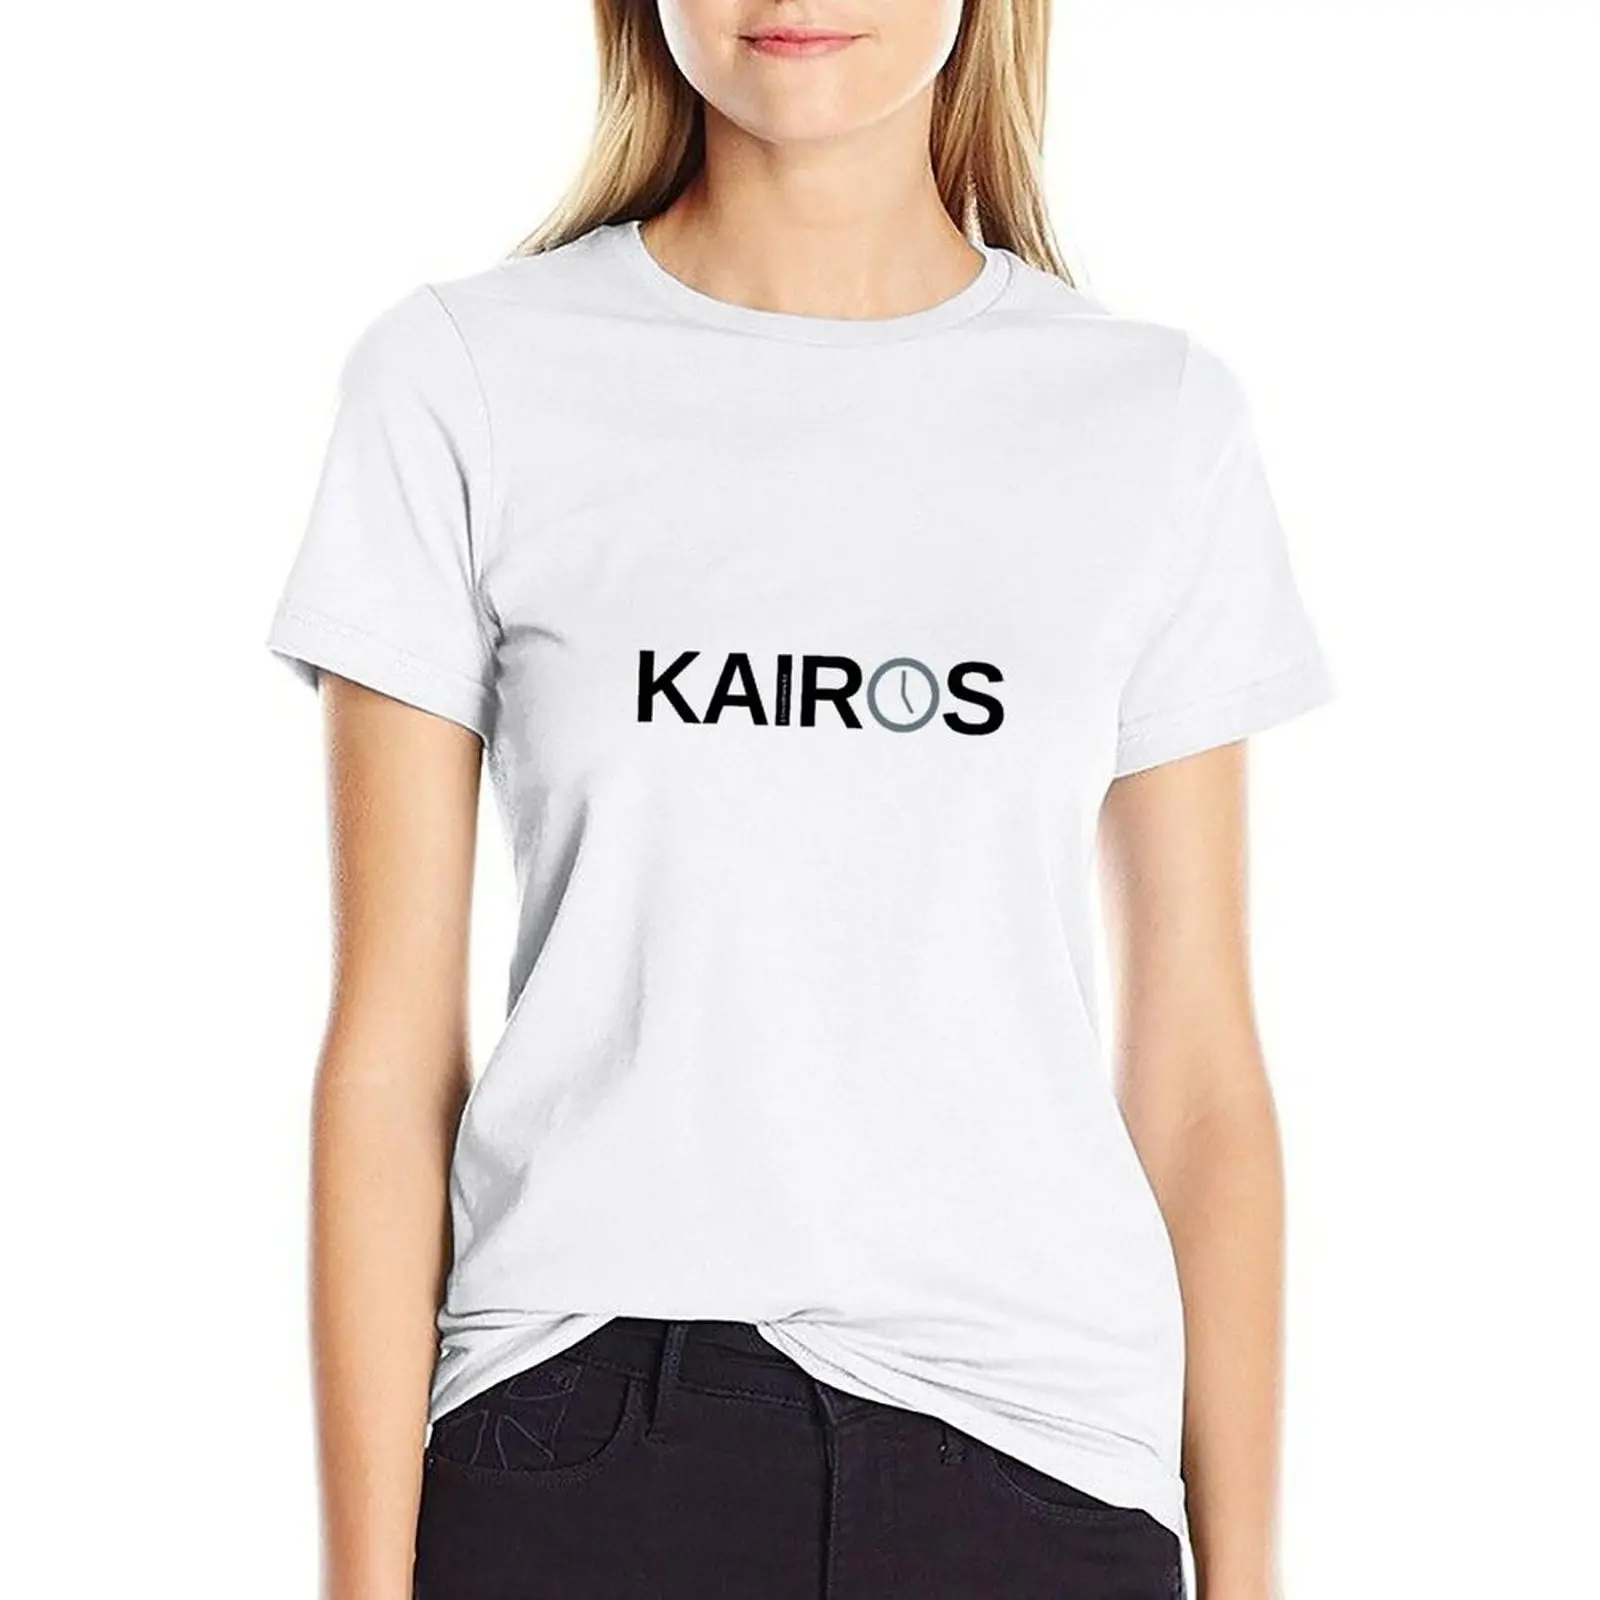 

Kairos T-shirt kawaii clothes vintage clothes oversized t shirts for Women